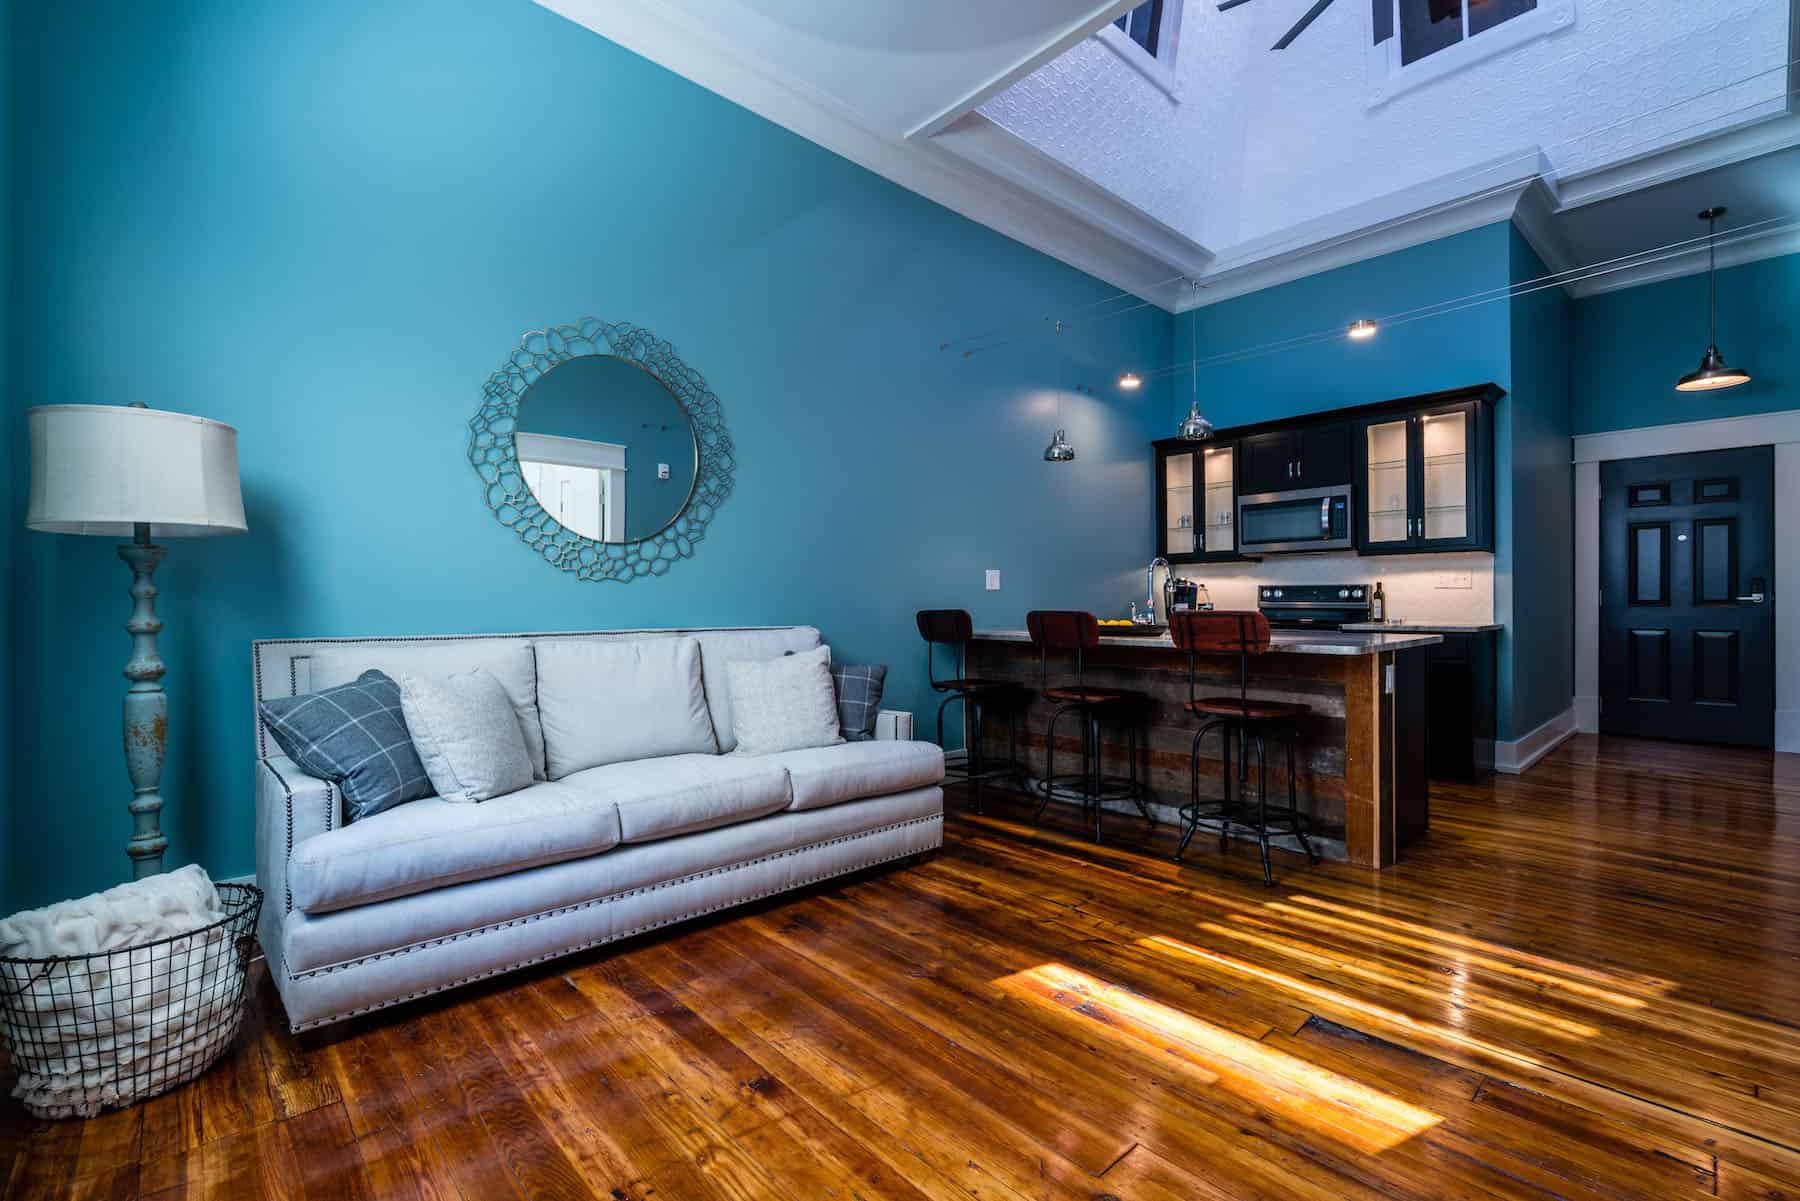 Wood floor, blue wall in center unit.